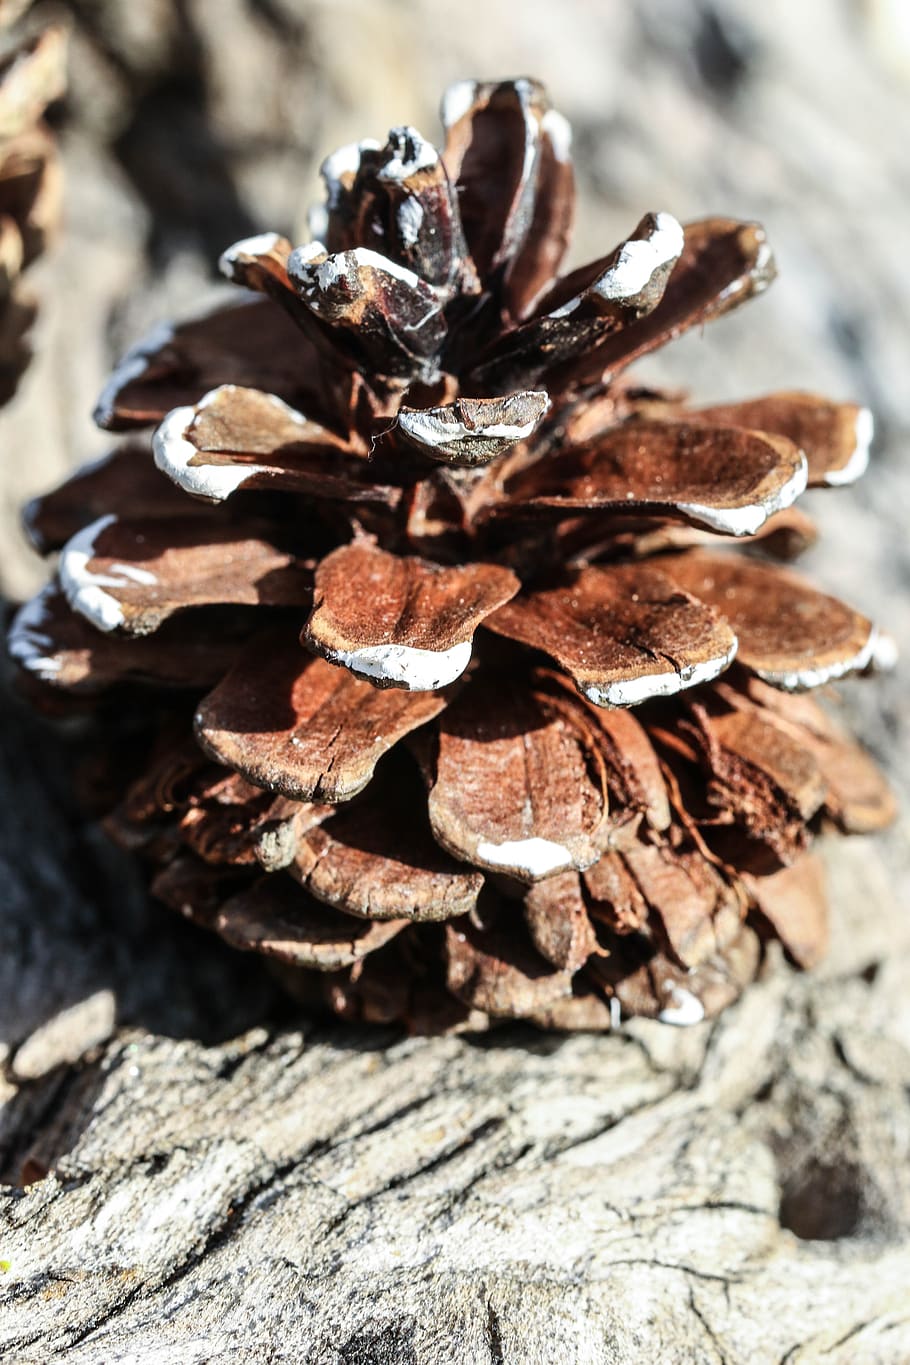 pinecone, nature, macro, close-up, day, focus on foreground, textured, pine cone, wood - material, plant